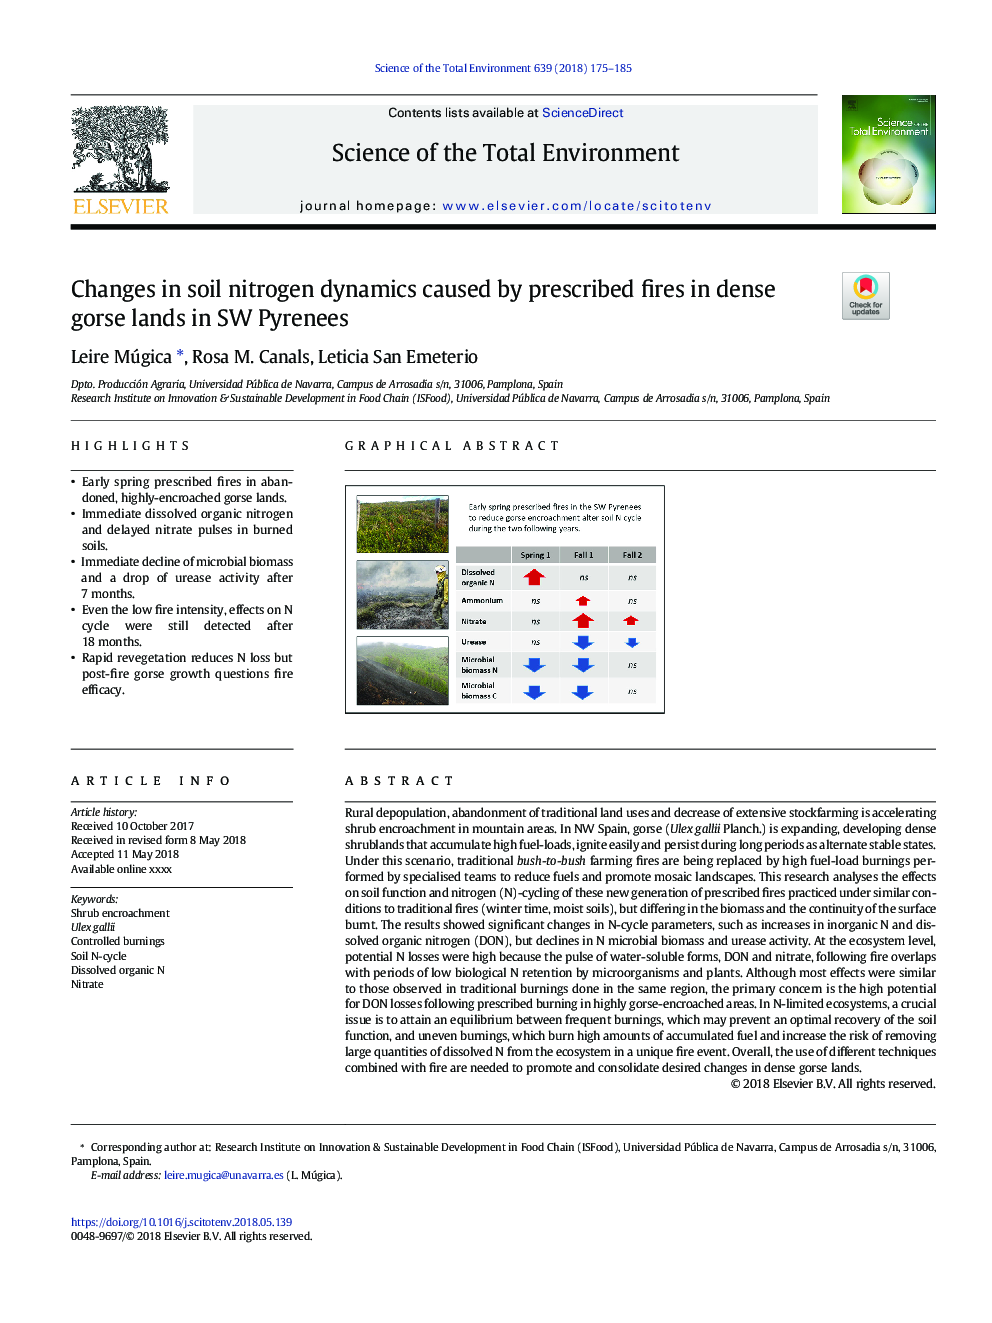 Changes in soil nitrogen dynamics caused by prescribed fires in dense gorse lands in SW Pyrenees